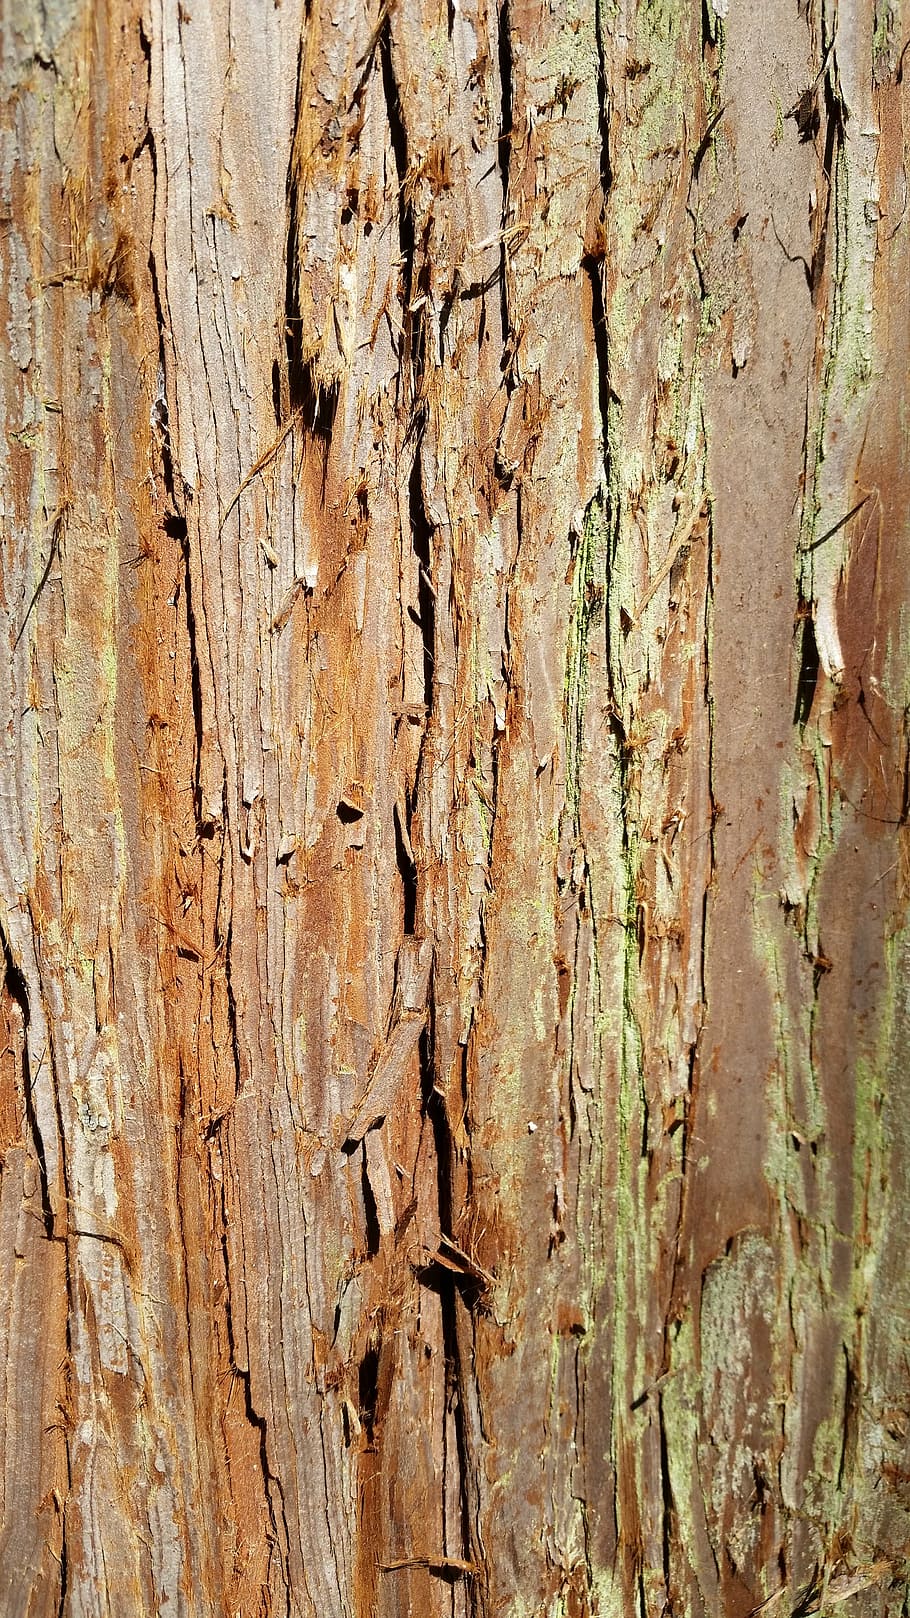 tree, the bark, texture, trunk, invoice, wood, backgrounds, full frame, textured, tree trunk